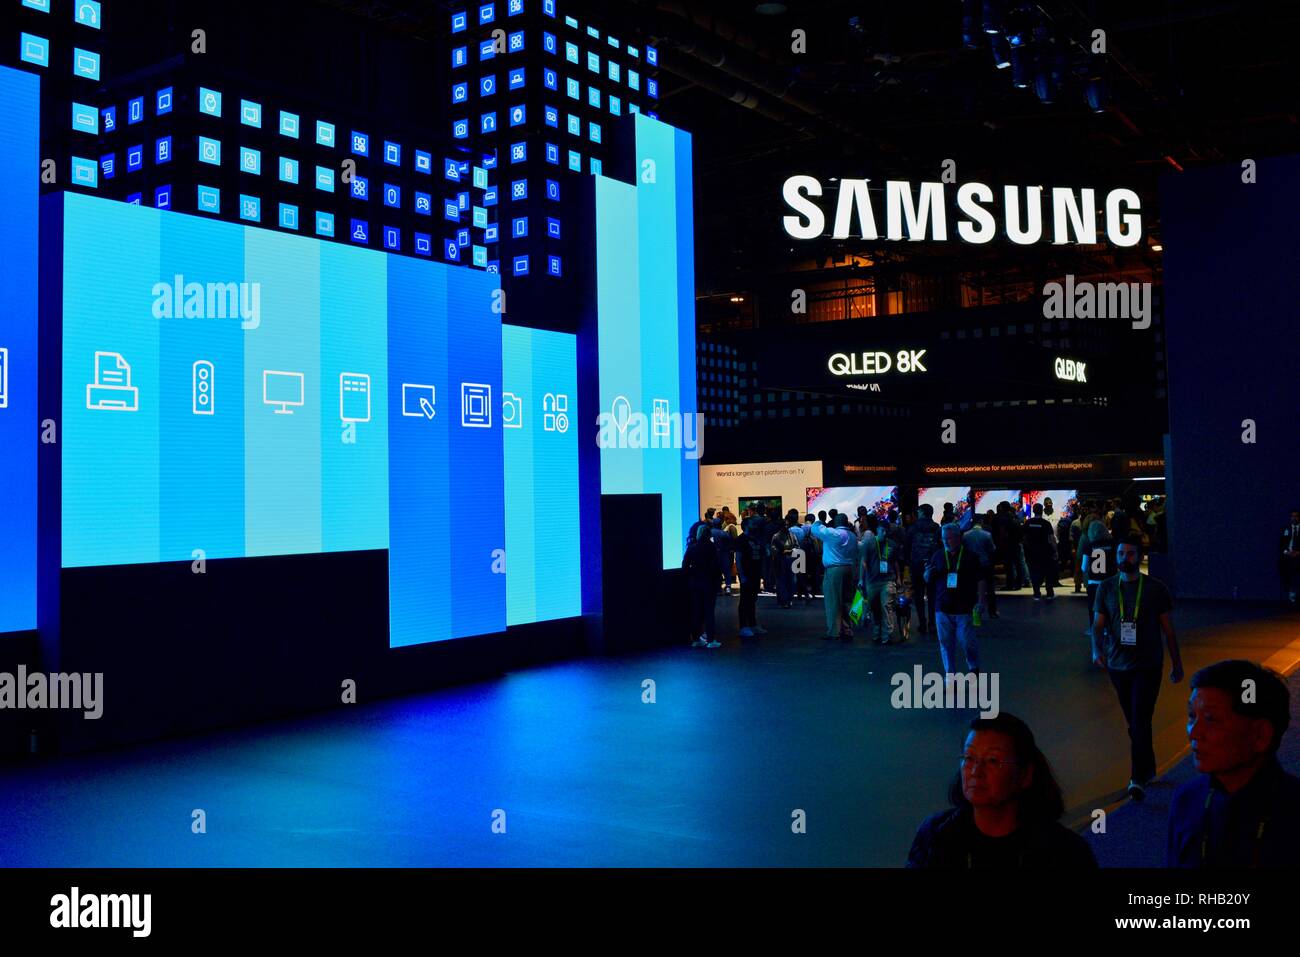 Samsung exhibit booth display entrance, featuring QLED 8K TV (television) at CES, world's largest consumer electronic show, Las Vegas, NV, USA Stock Photo